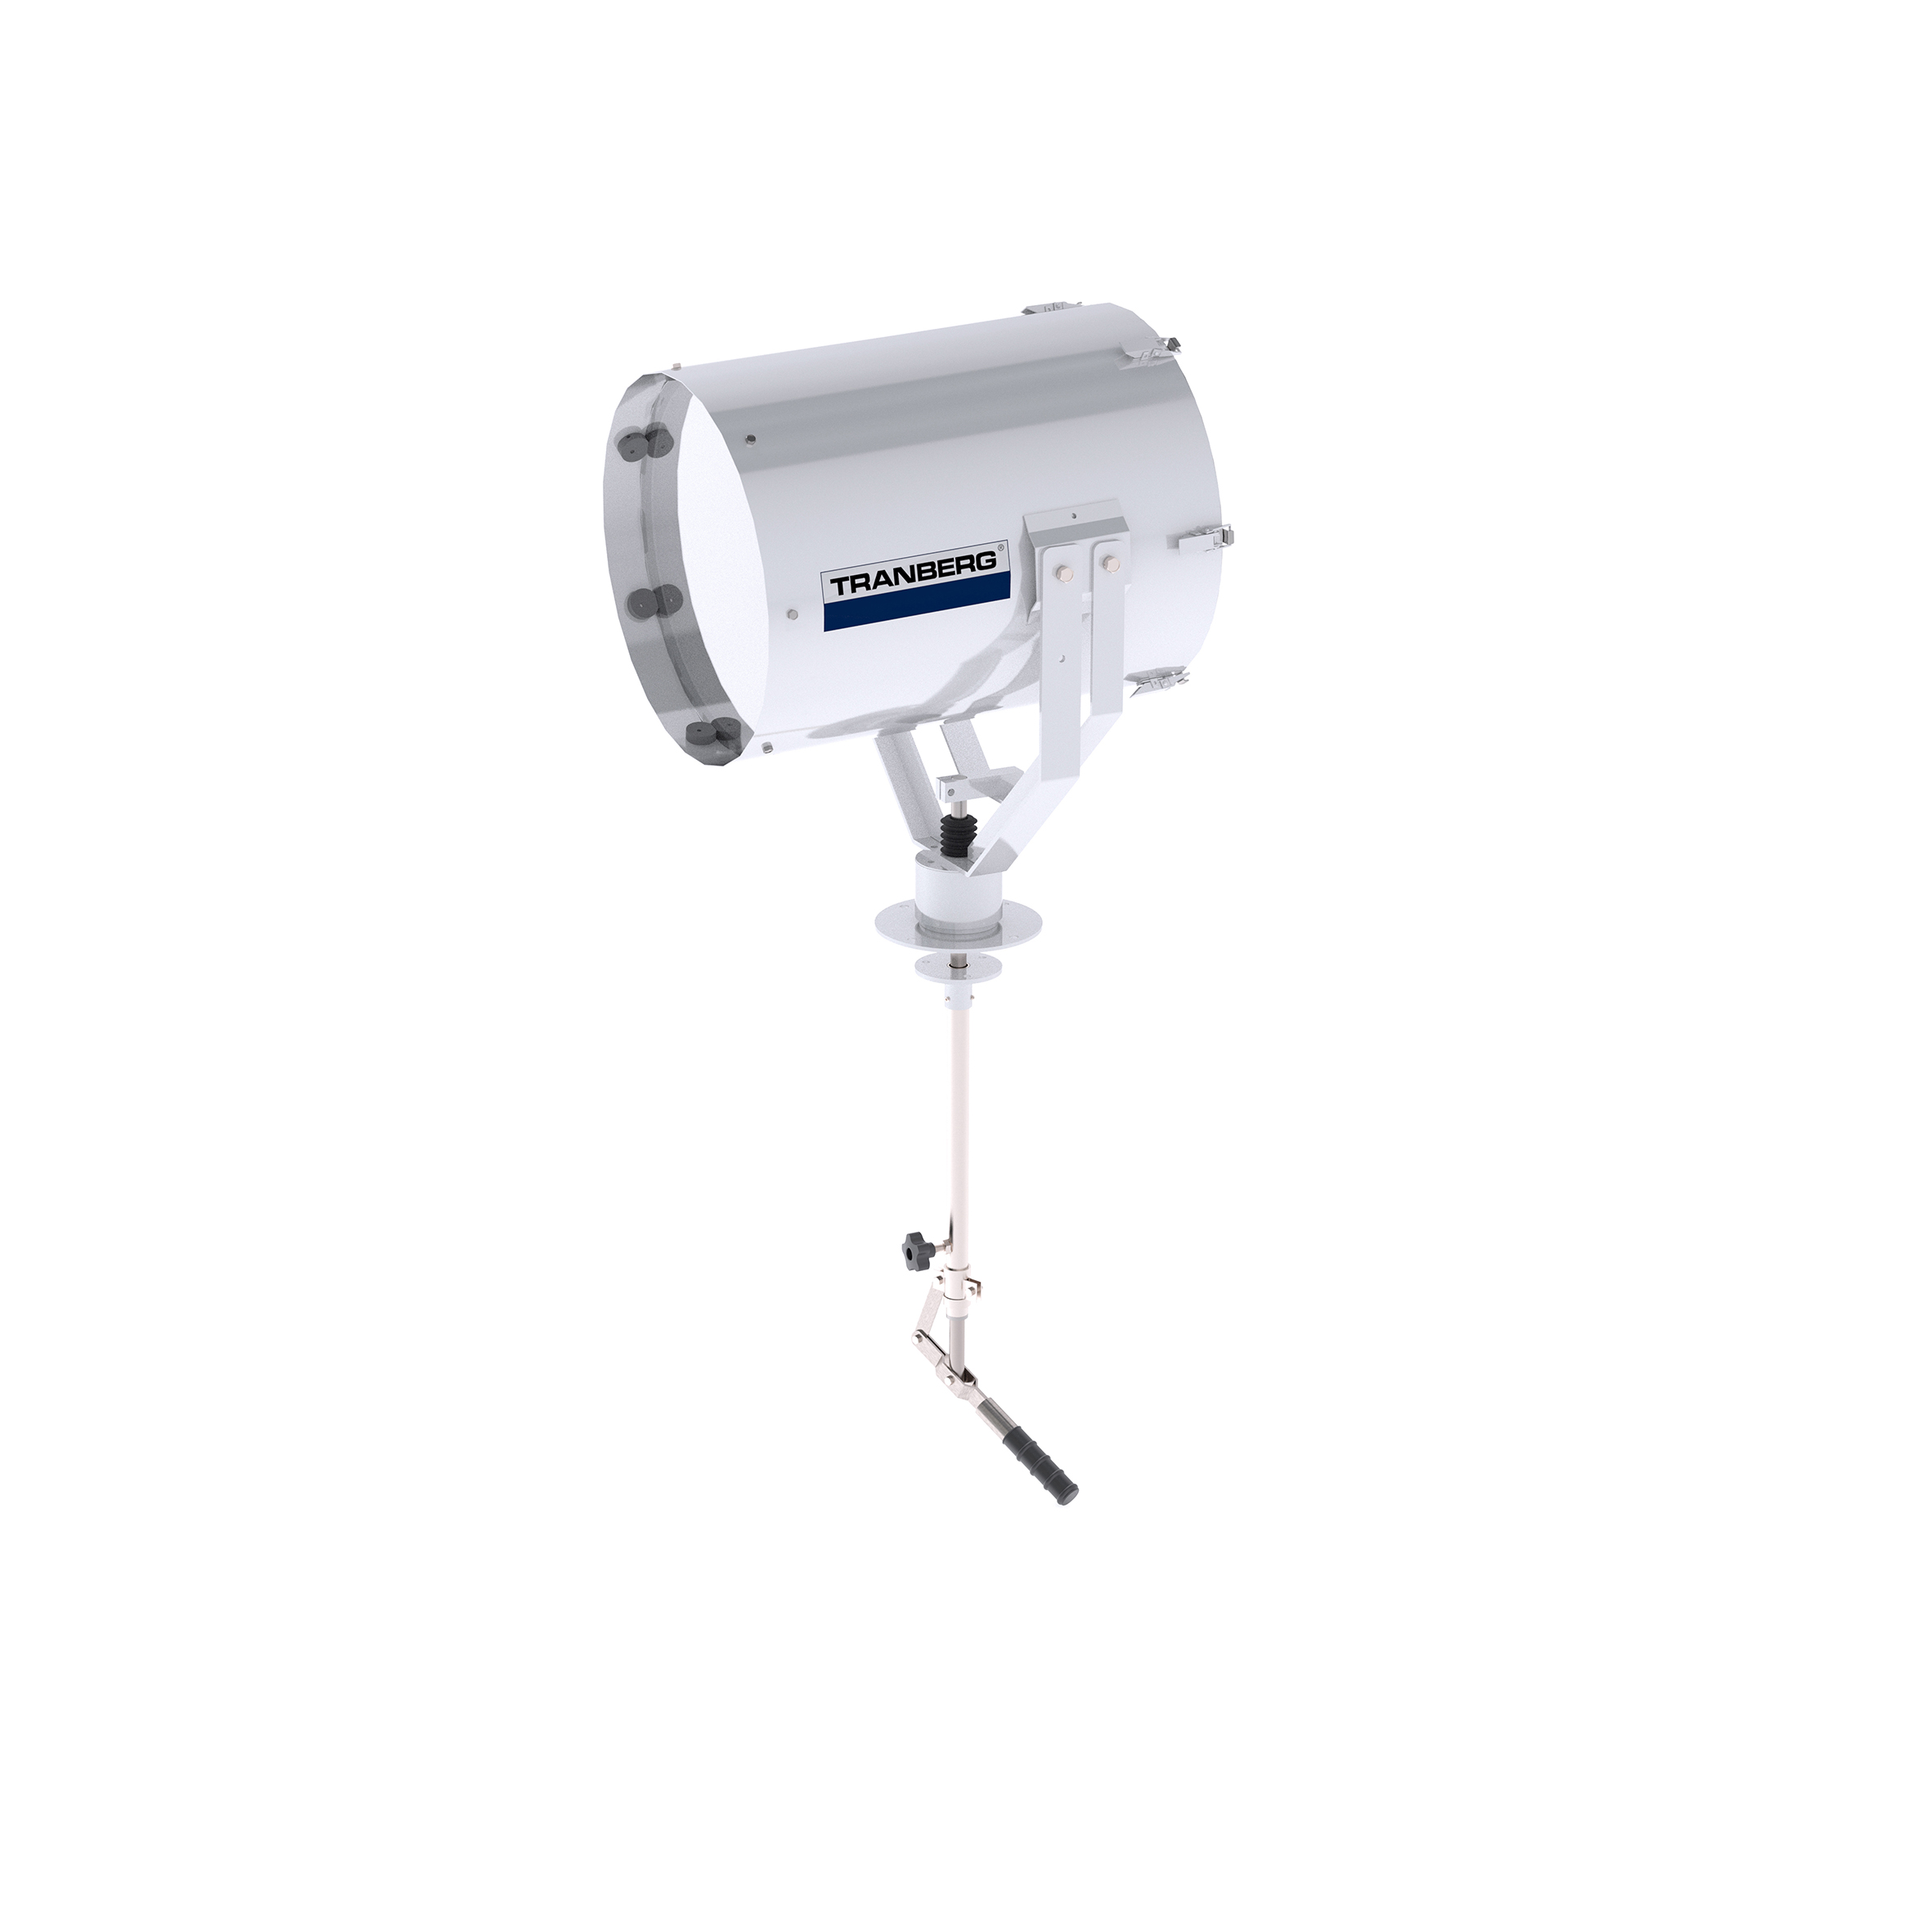 TEF 2630 Searchlight: Xenon 1000W bulb incl, 230V, Bridge Controlled, Stainless Steel photo